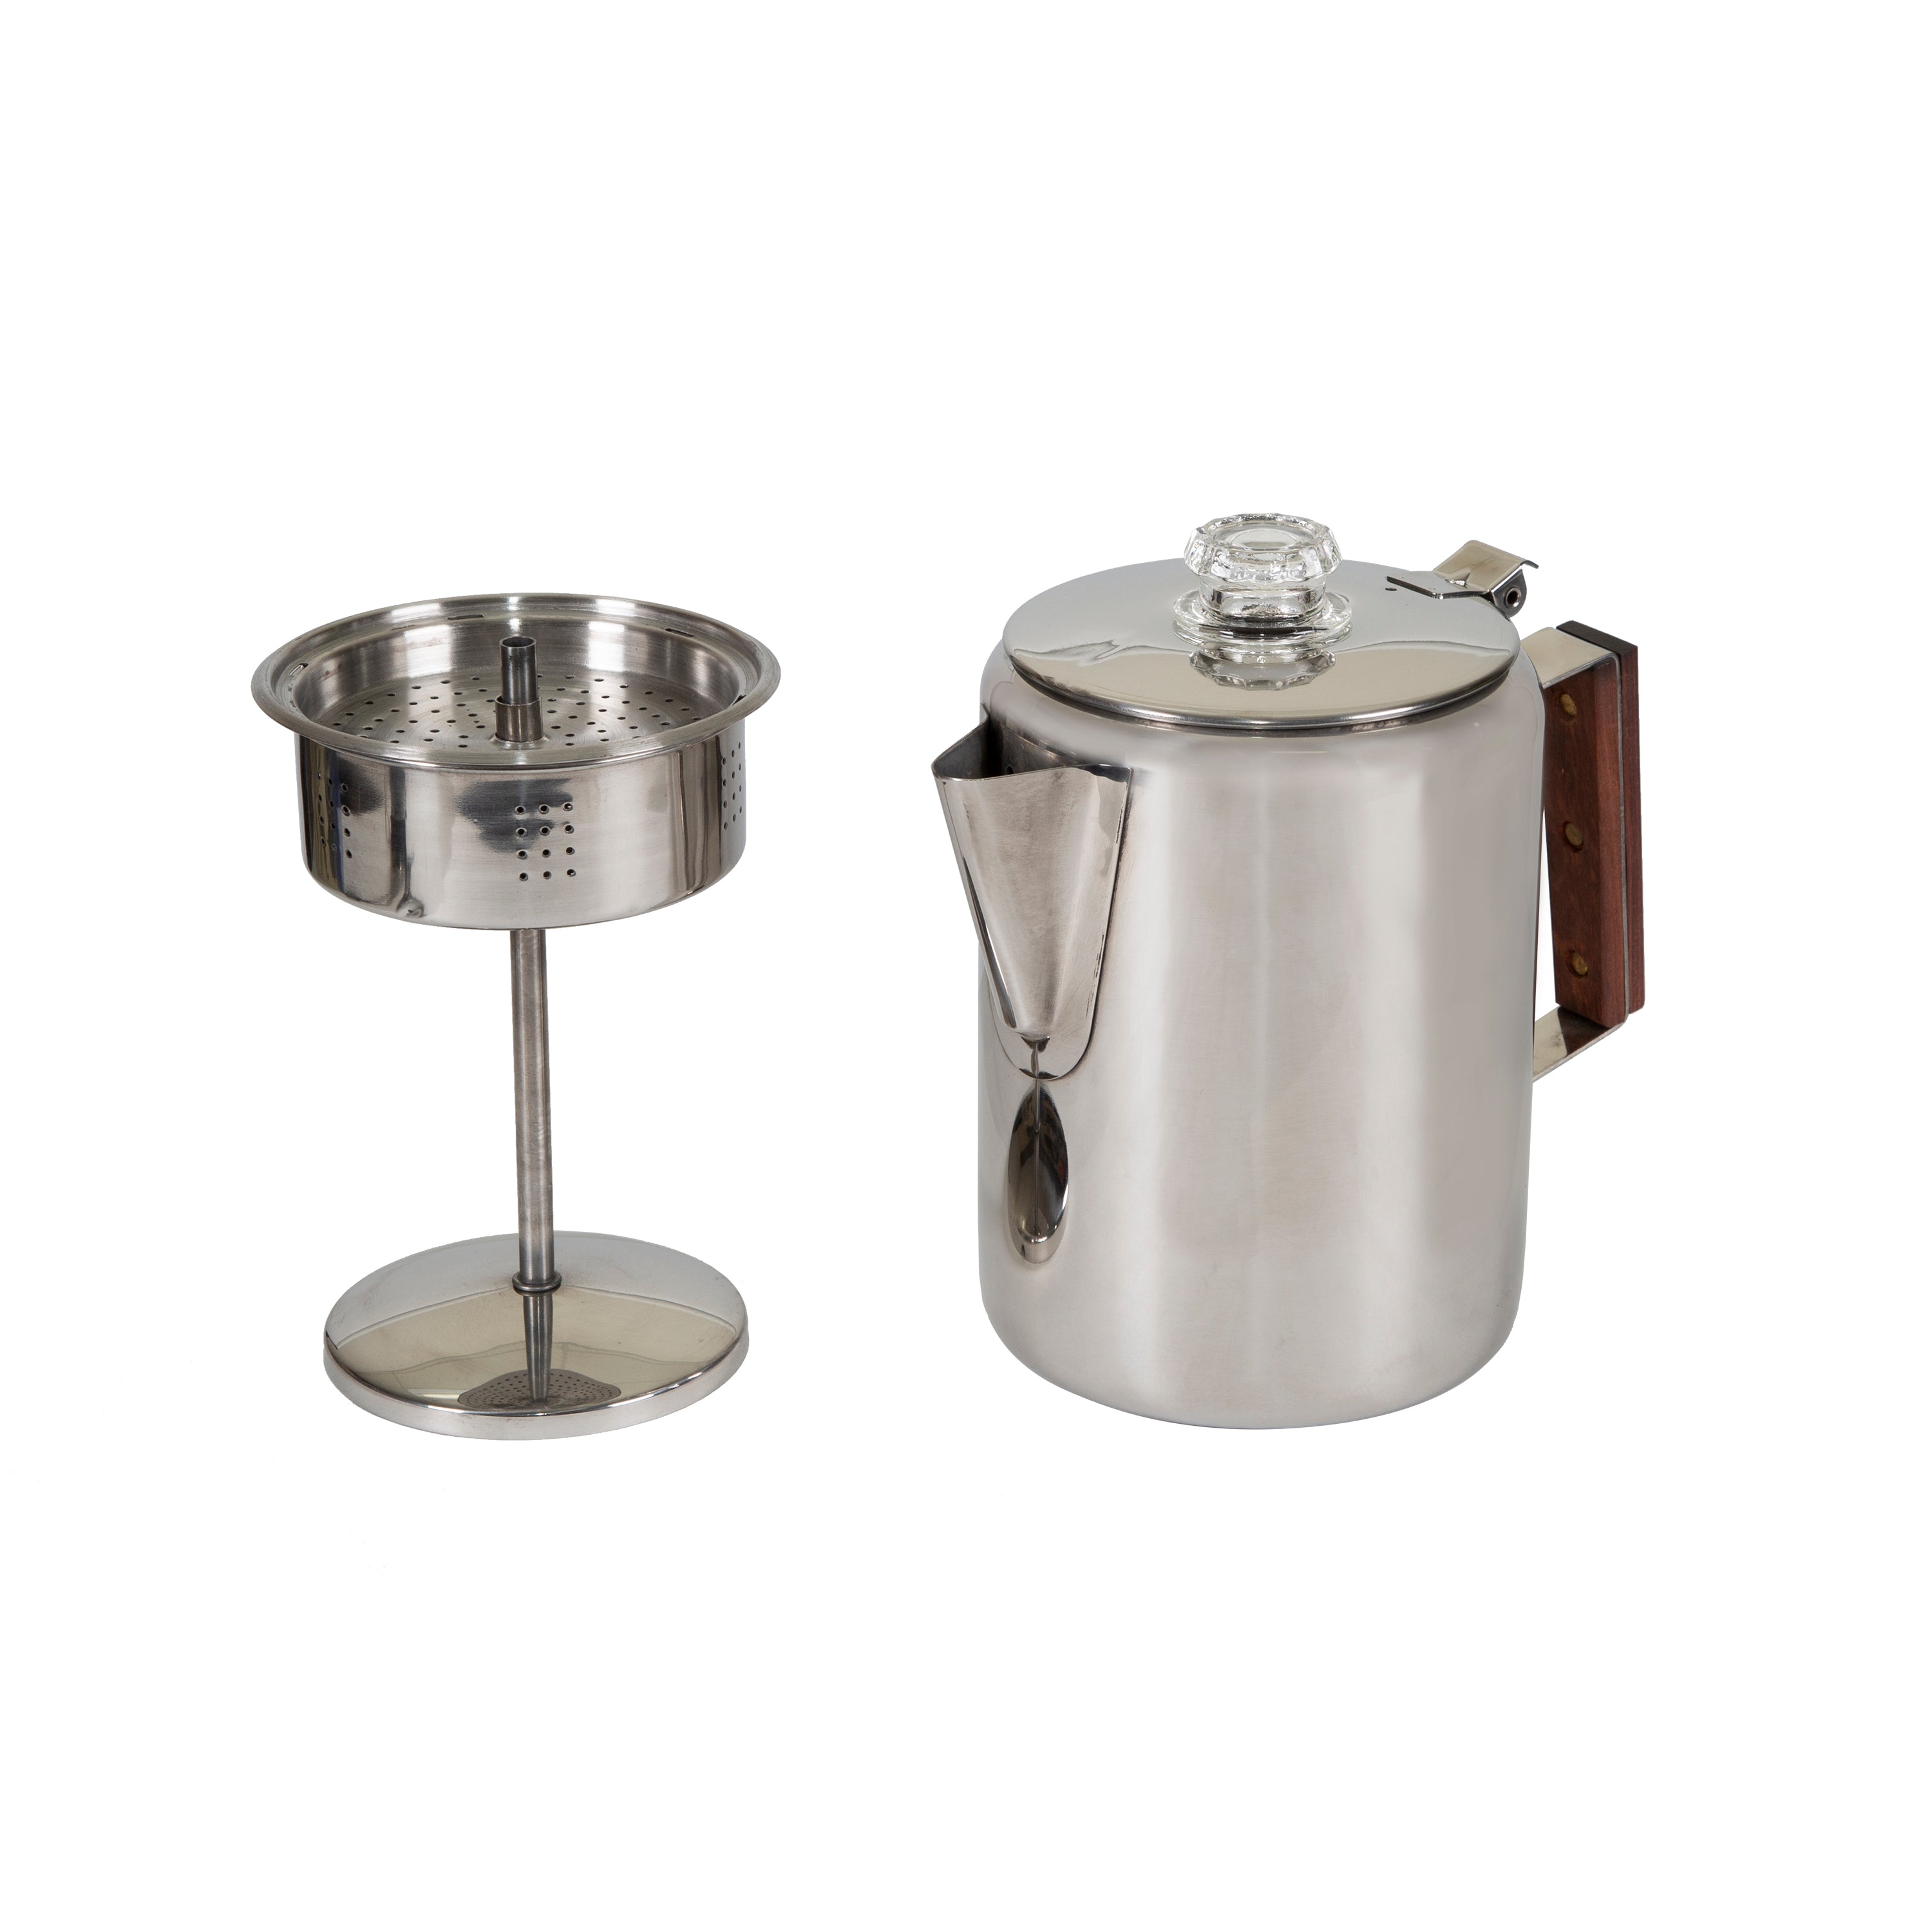 Stainless Steel Percolator Coffee Pot - 9 Cup-eSafety Supplies, Inc